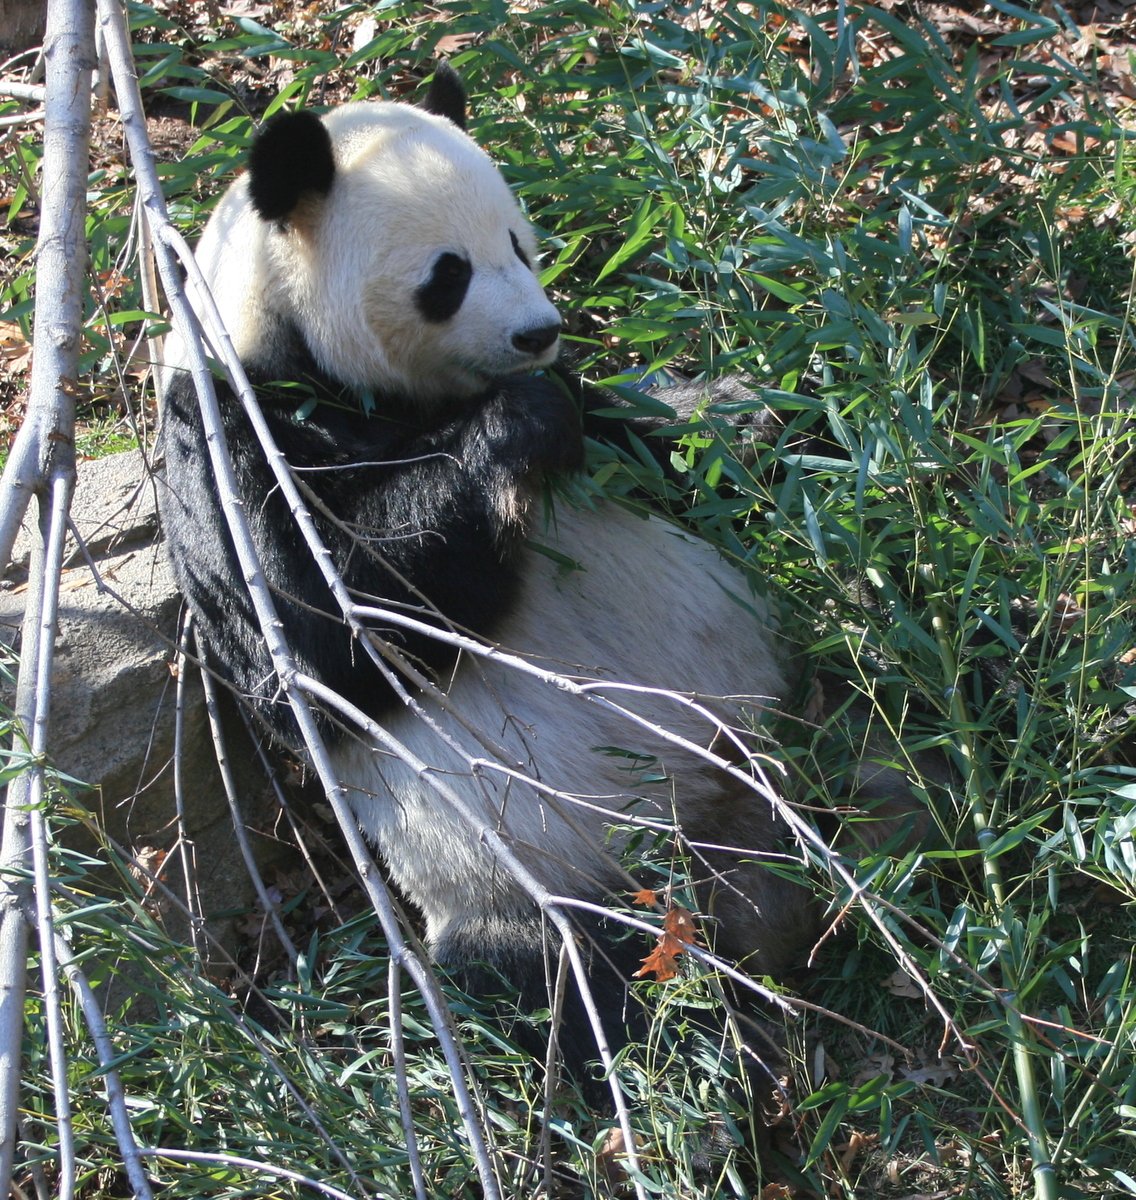 a panda bear sitting next to a pile of rocks and grass